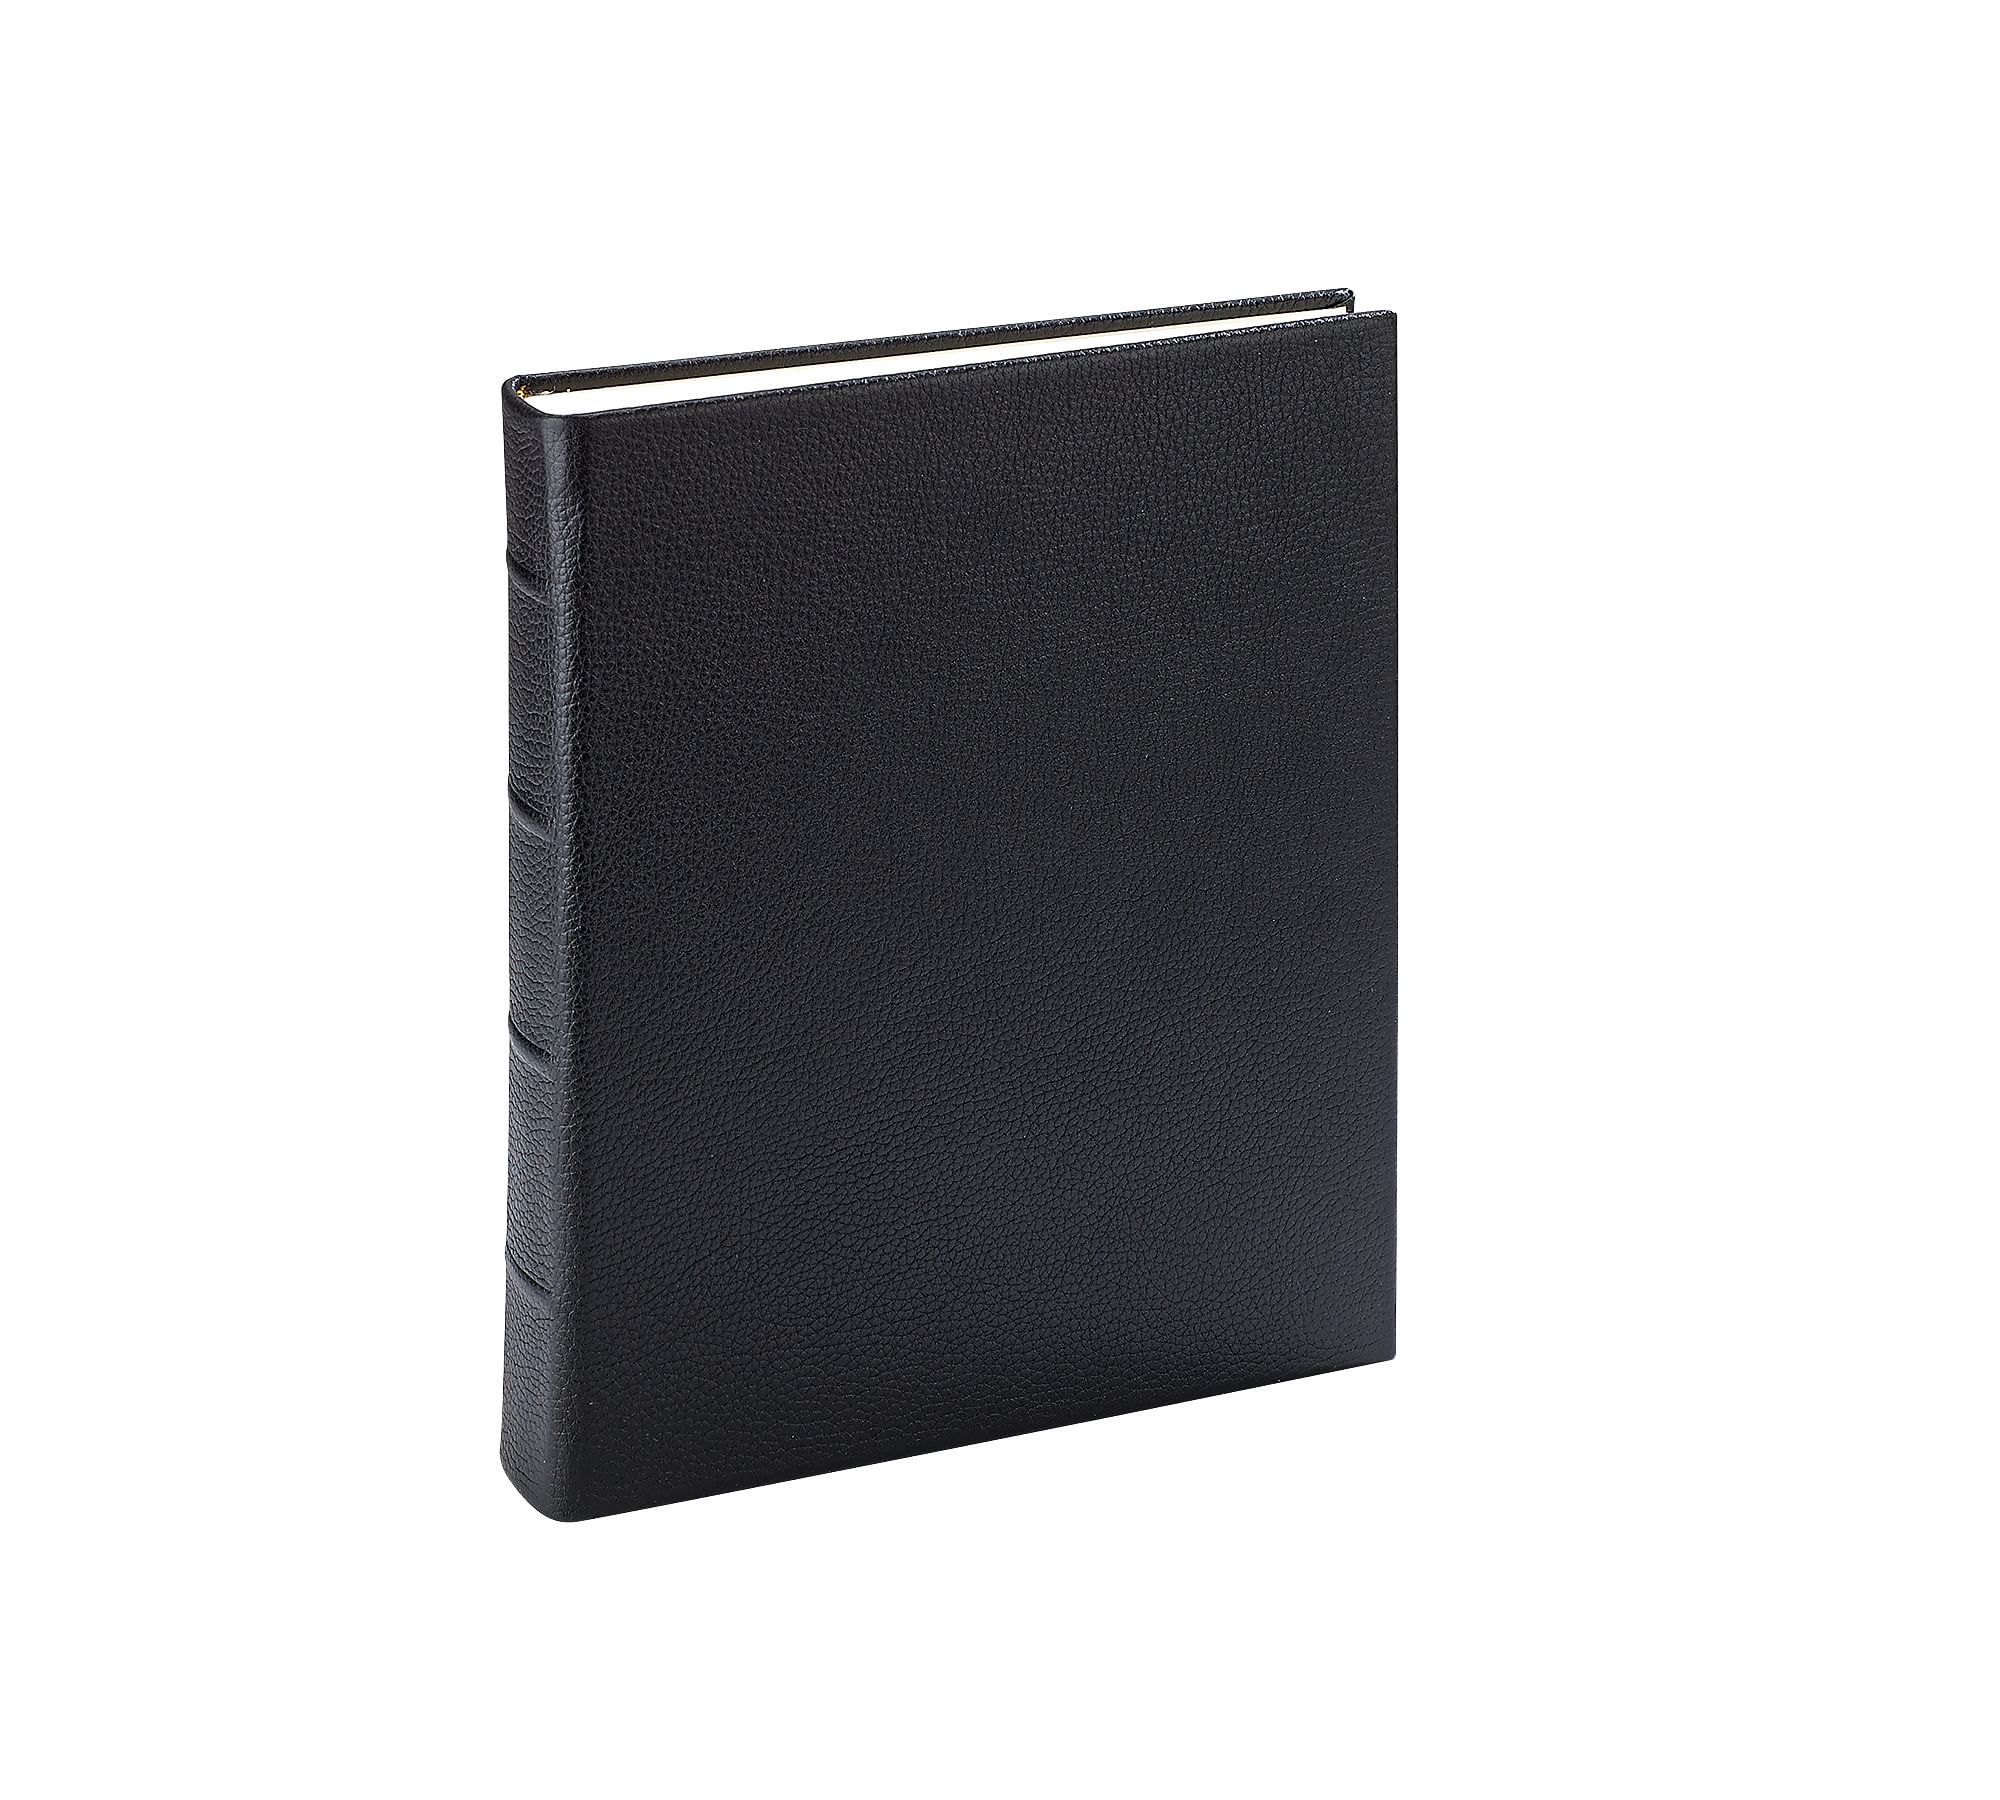 Leather Bound Photo Albums